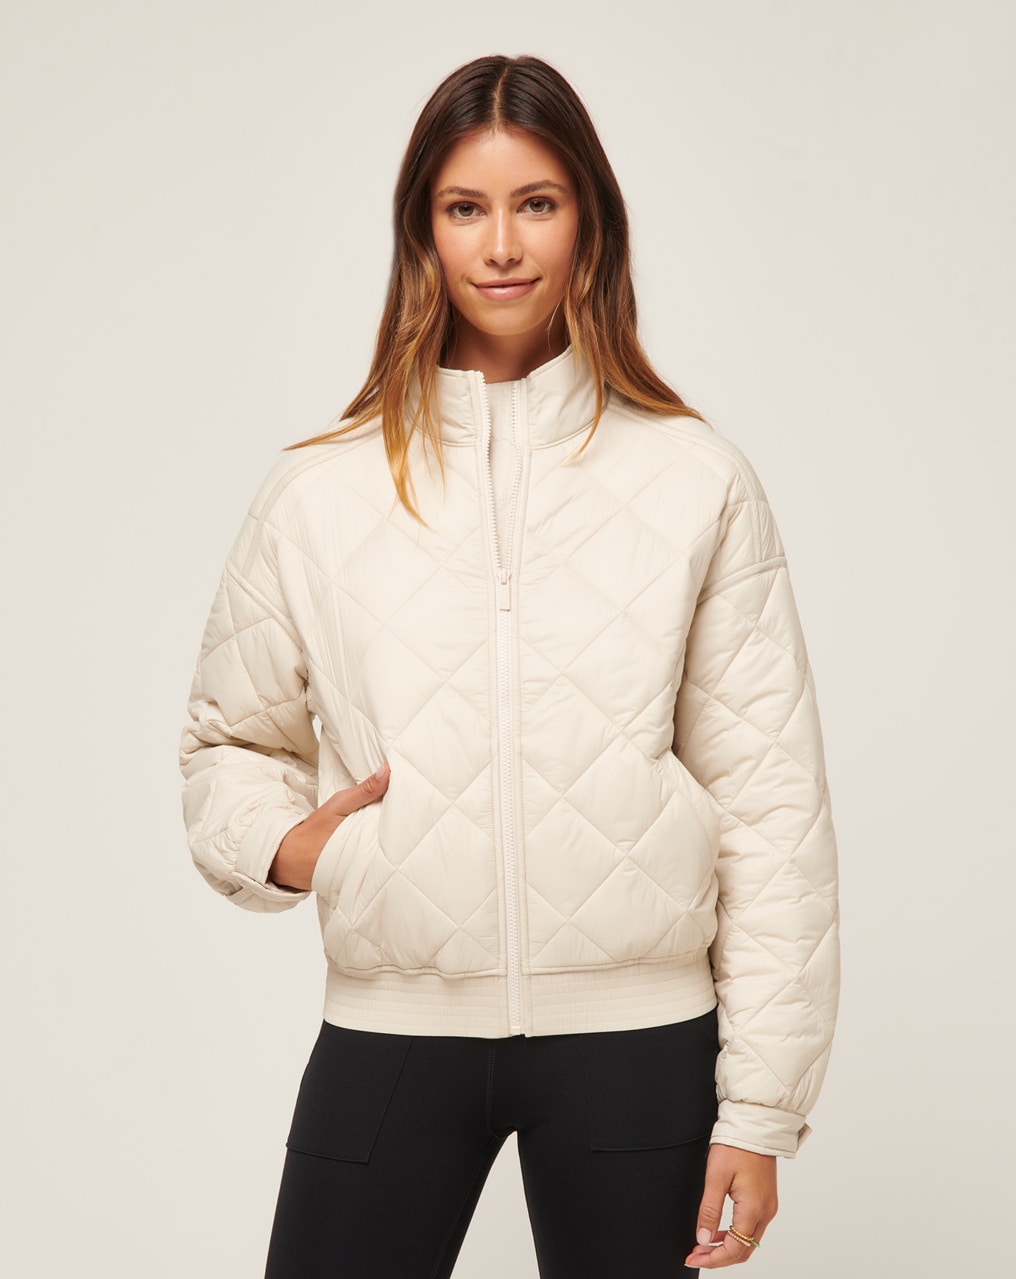 LIGHTS AT NIGHT QUILTED JACKET